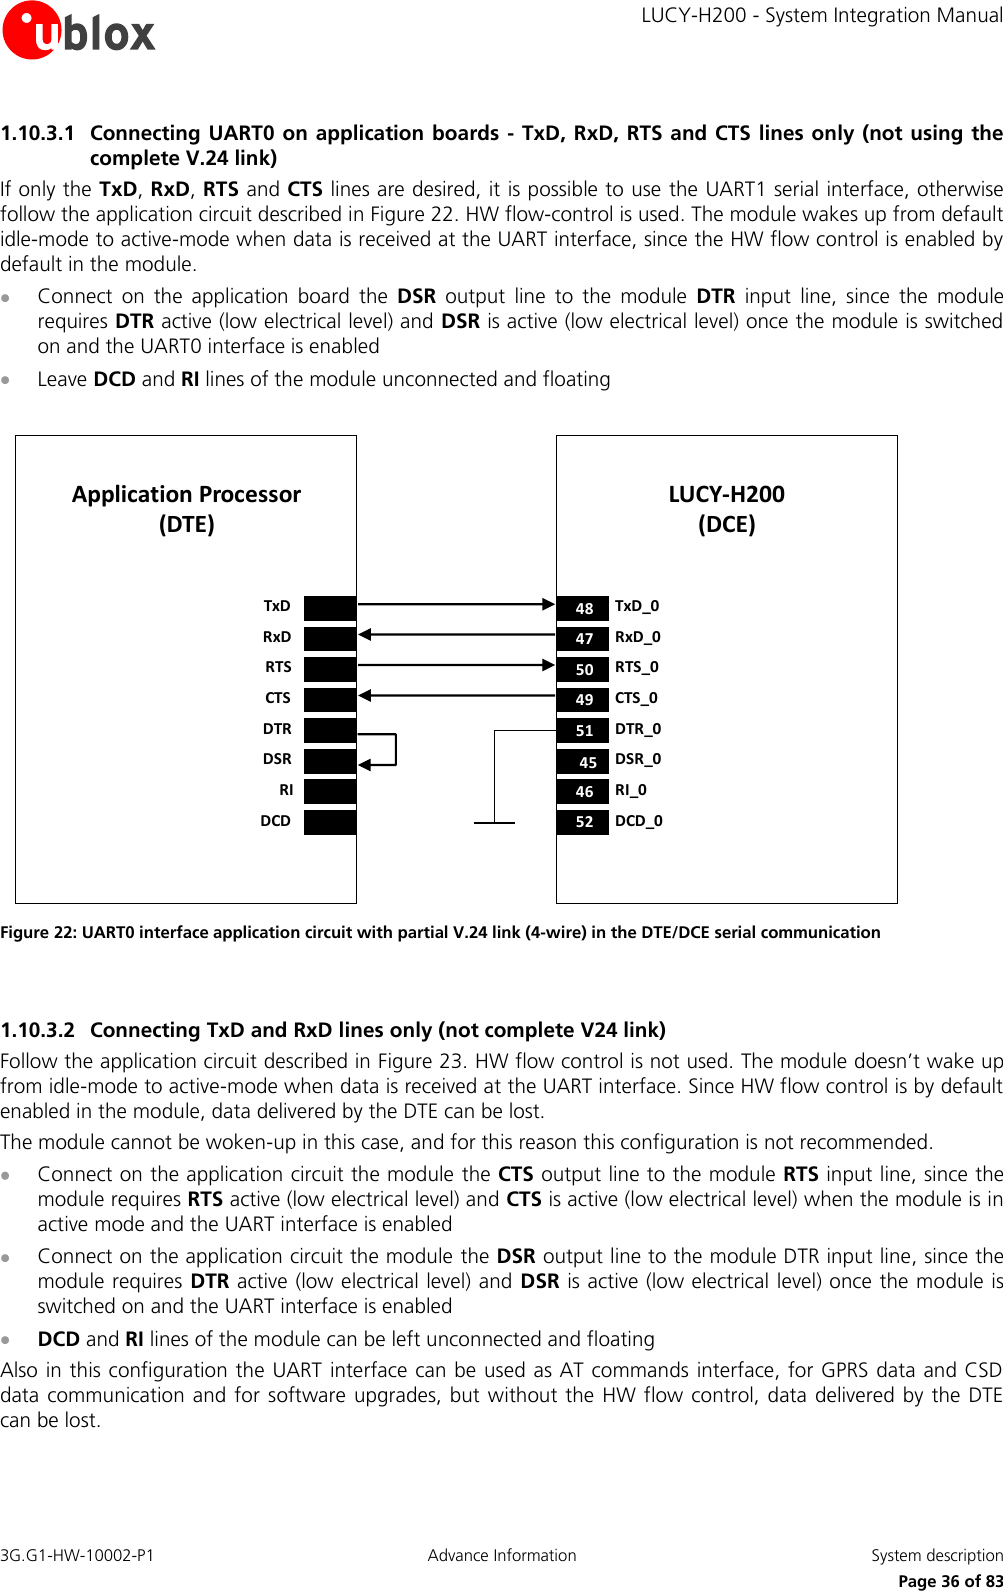     LUCY-H200 - System Integration Manual 3G.G1-HW-10002-P1  Advance Information  System description      Page 36 of 83 1.10.3.1 Connecting UART0 on application boards - TxD, RxD, RTS and CTS lines only (not using the complete V.24 link) If only the TxD, RxD, RTS and CTS lines are desired, it is possible to use the UART1 serial interface, otherwise follow the application circuit described in Figure 22. HW flow-control is used. The module wakes up from default idle-mode to active-mode when data is received at the UART interface, since the HW flow control is enabled by default in the module.  Connect  on  the  application  board  the  DSR  output  line  to  the  module  DTR  input  line,  since  the  module requires DTR active (low electrical level) and DSR is active (low electrical level) once the module is switched on and the UART0 interface is enabled  Leave DCD and RI lines of the module unconnected and floating  LUCY-H200(DCE)Application Processor(DTE)4847TxD_0RxD_05049RTS_0CTS_052464551 DTR_0DSR_0RI_0DCD_0TxDRxDRTSCTSDTRDSRRIDCD Figure 22: UART0 interface application circuit with partial V.24 link (4-wire) in the DTE/DCE serial communication  1.10.3.2 Connecting TxD and RxD lines only (not complete V24 link)  Follow the application circuit described in Figure 23. HW flow control is not used. The module doesn’t wake up from idle-mode to active-mode when data is received at the UART interface. Since HW flow control is by default enabled in the module, data delivered by the DTE can be lost. The module cannot be woken-up in this case, and for this reason this configuration is not recommended.  Connect on the application circuit the module the CTS output line to the module RTS input line, since the module requires RTS active (low electrical level) and CTS is active (low electrical level) when the module is in active mode and the UART interface is enabled  Connect on the application circuit the module the DSR output line to the module DTR input line, since the module requires DTR active (low electrical level) and DSR is active (low electrical level) once the module is switched on and the UART interface is enabled  DCD and RI lines of the module can be left unconnected and floating Also in this configuration the UART interface can be used as AT commands interface, for GPRS data and CSD data communication and for software upgrades, but without the HW flow  control, data delivered by the DTE can be lost. 